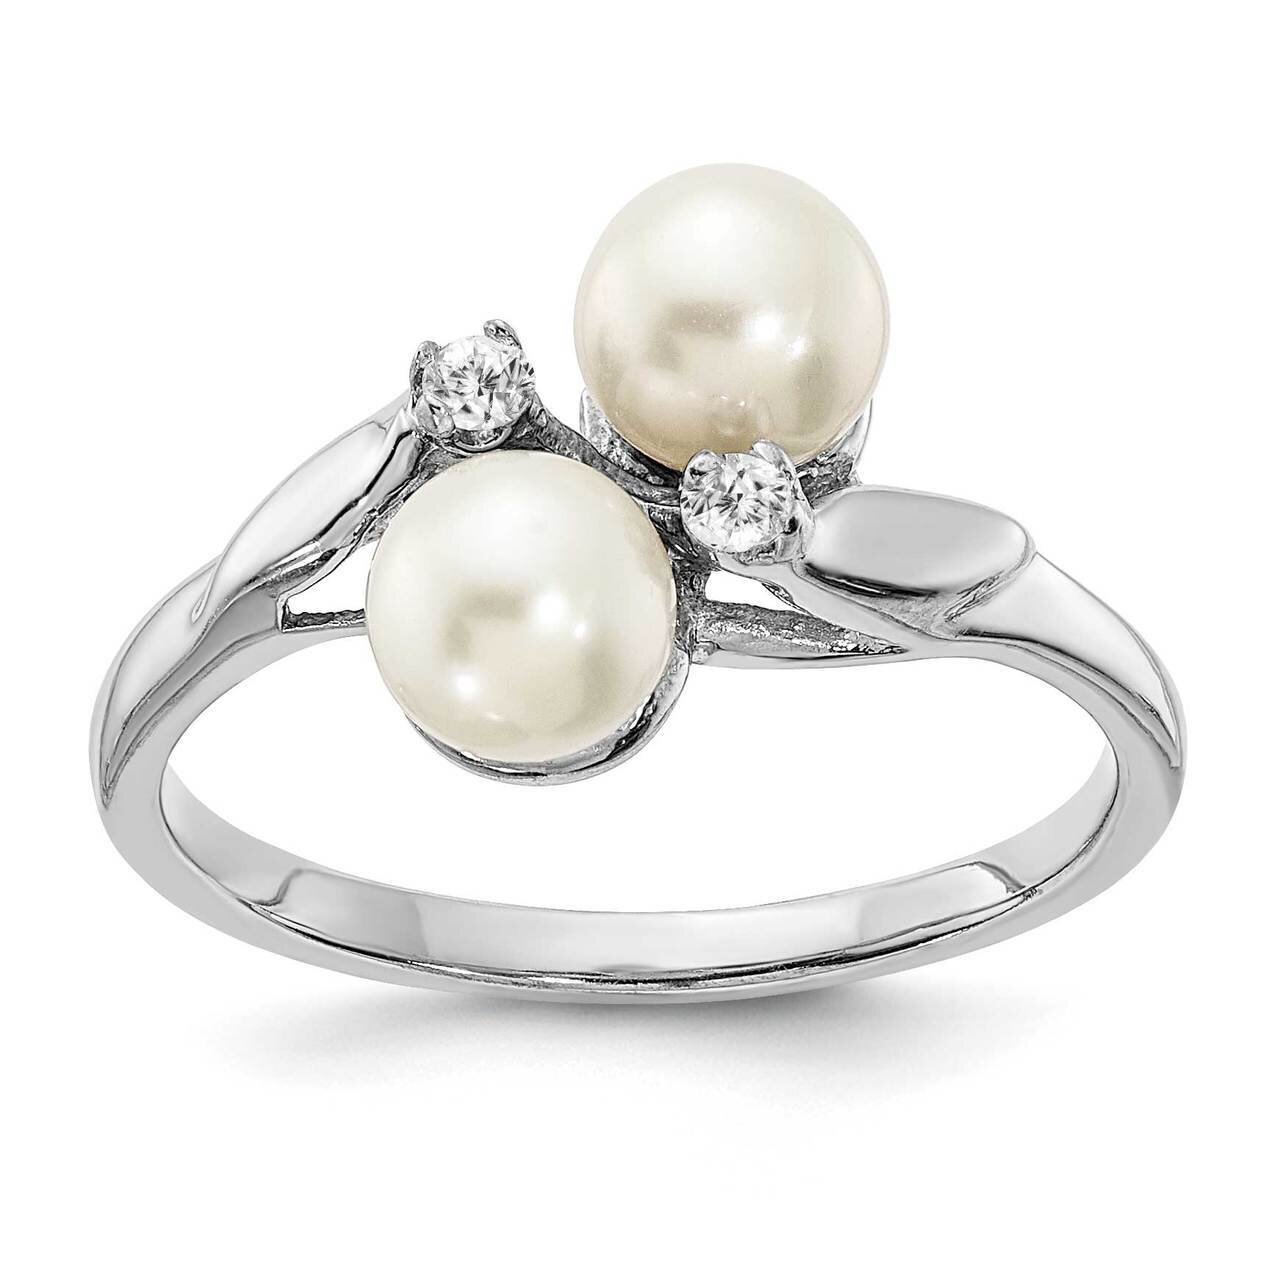 5mm Freshwater Cultured Pearl Diamond Ring 14k White Gold Y1880PL_AA